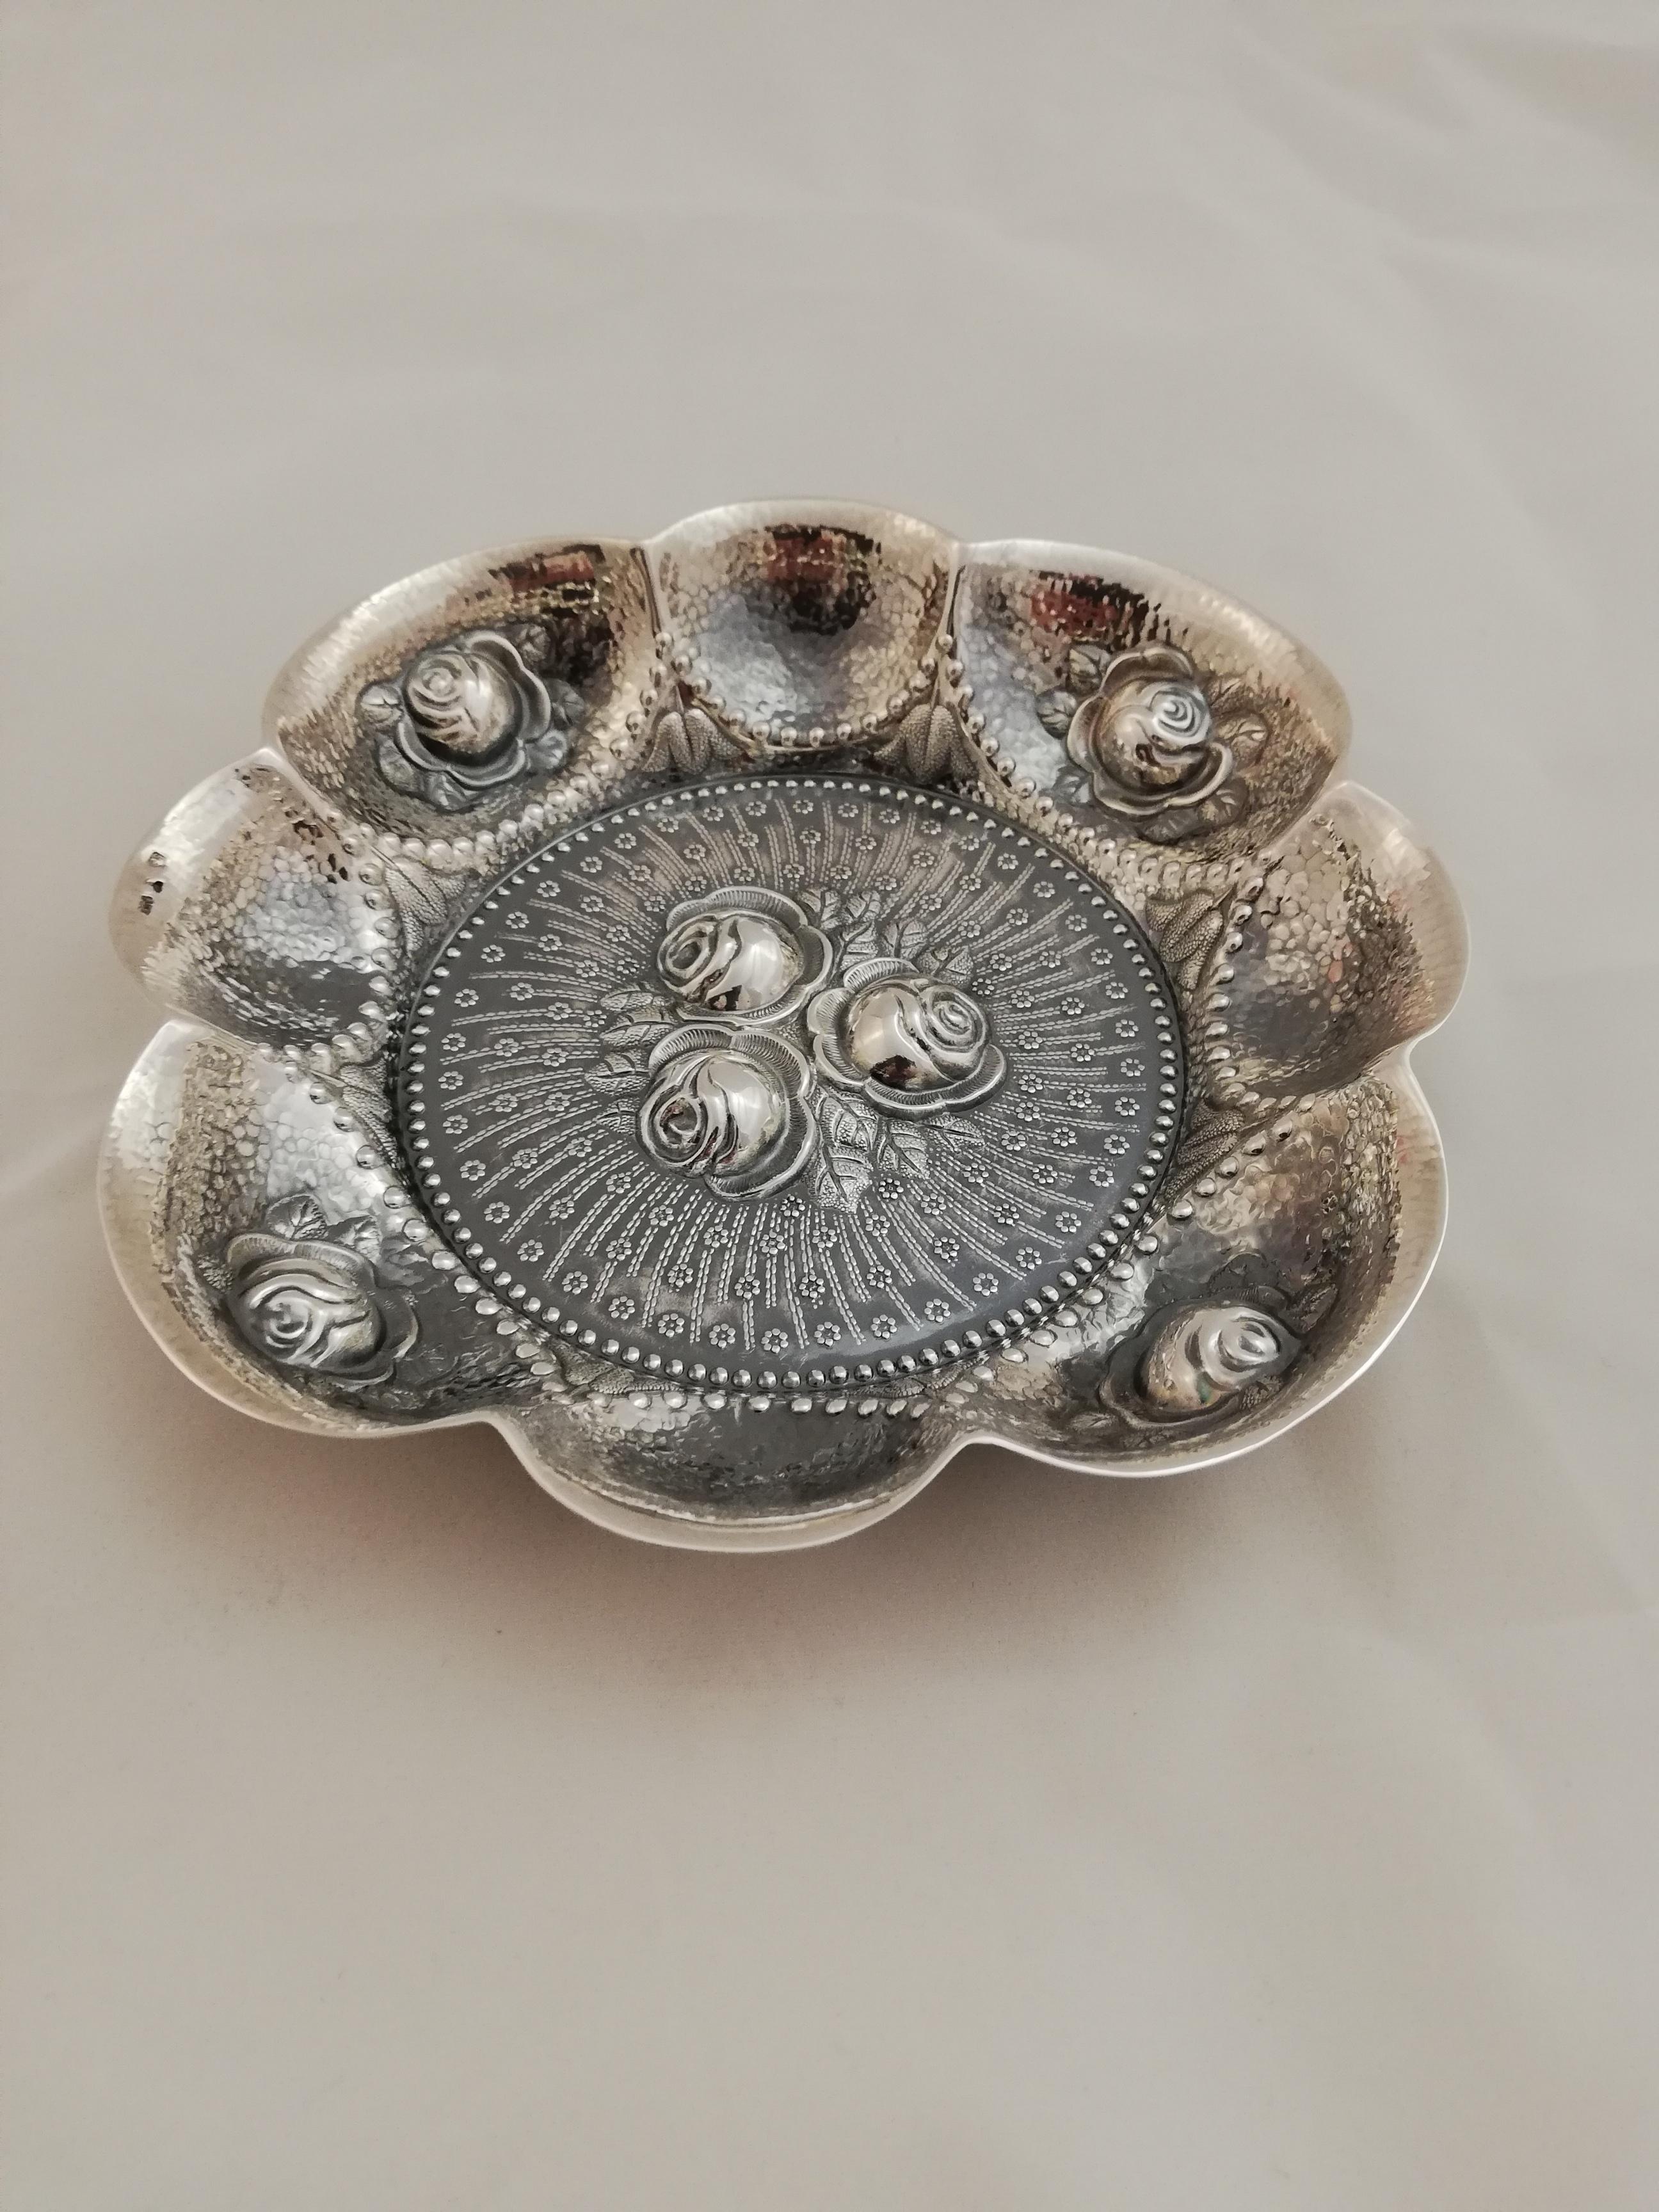 Handmade, chiselled silver dish with flower ornaments. It could be used for various purposed, either as s small serving dish, for appetizers or simply as a decorative object.
 